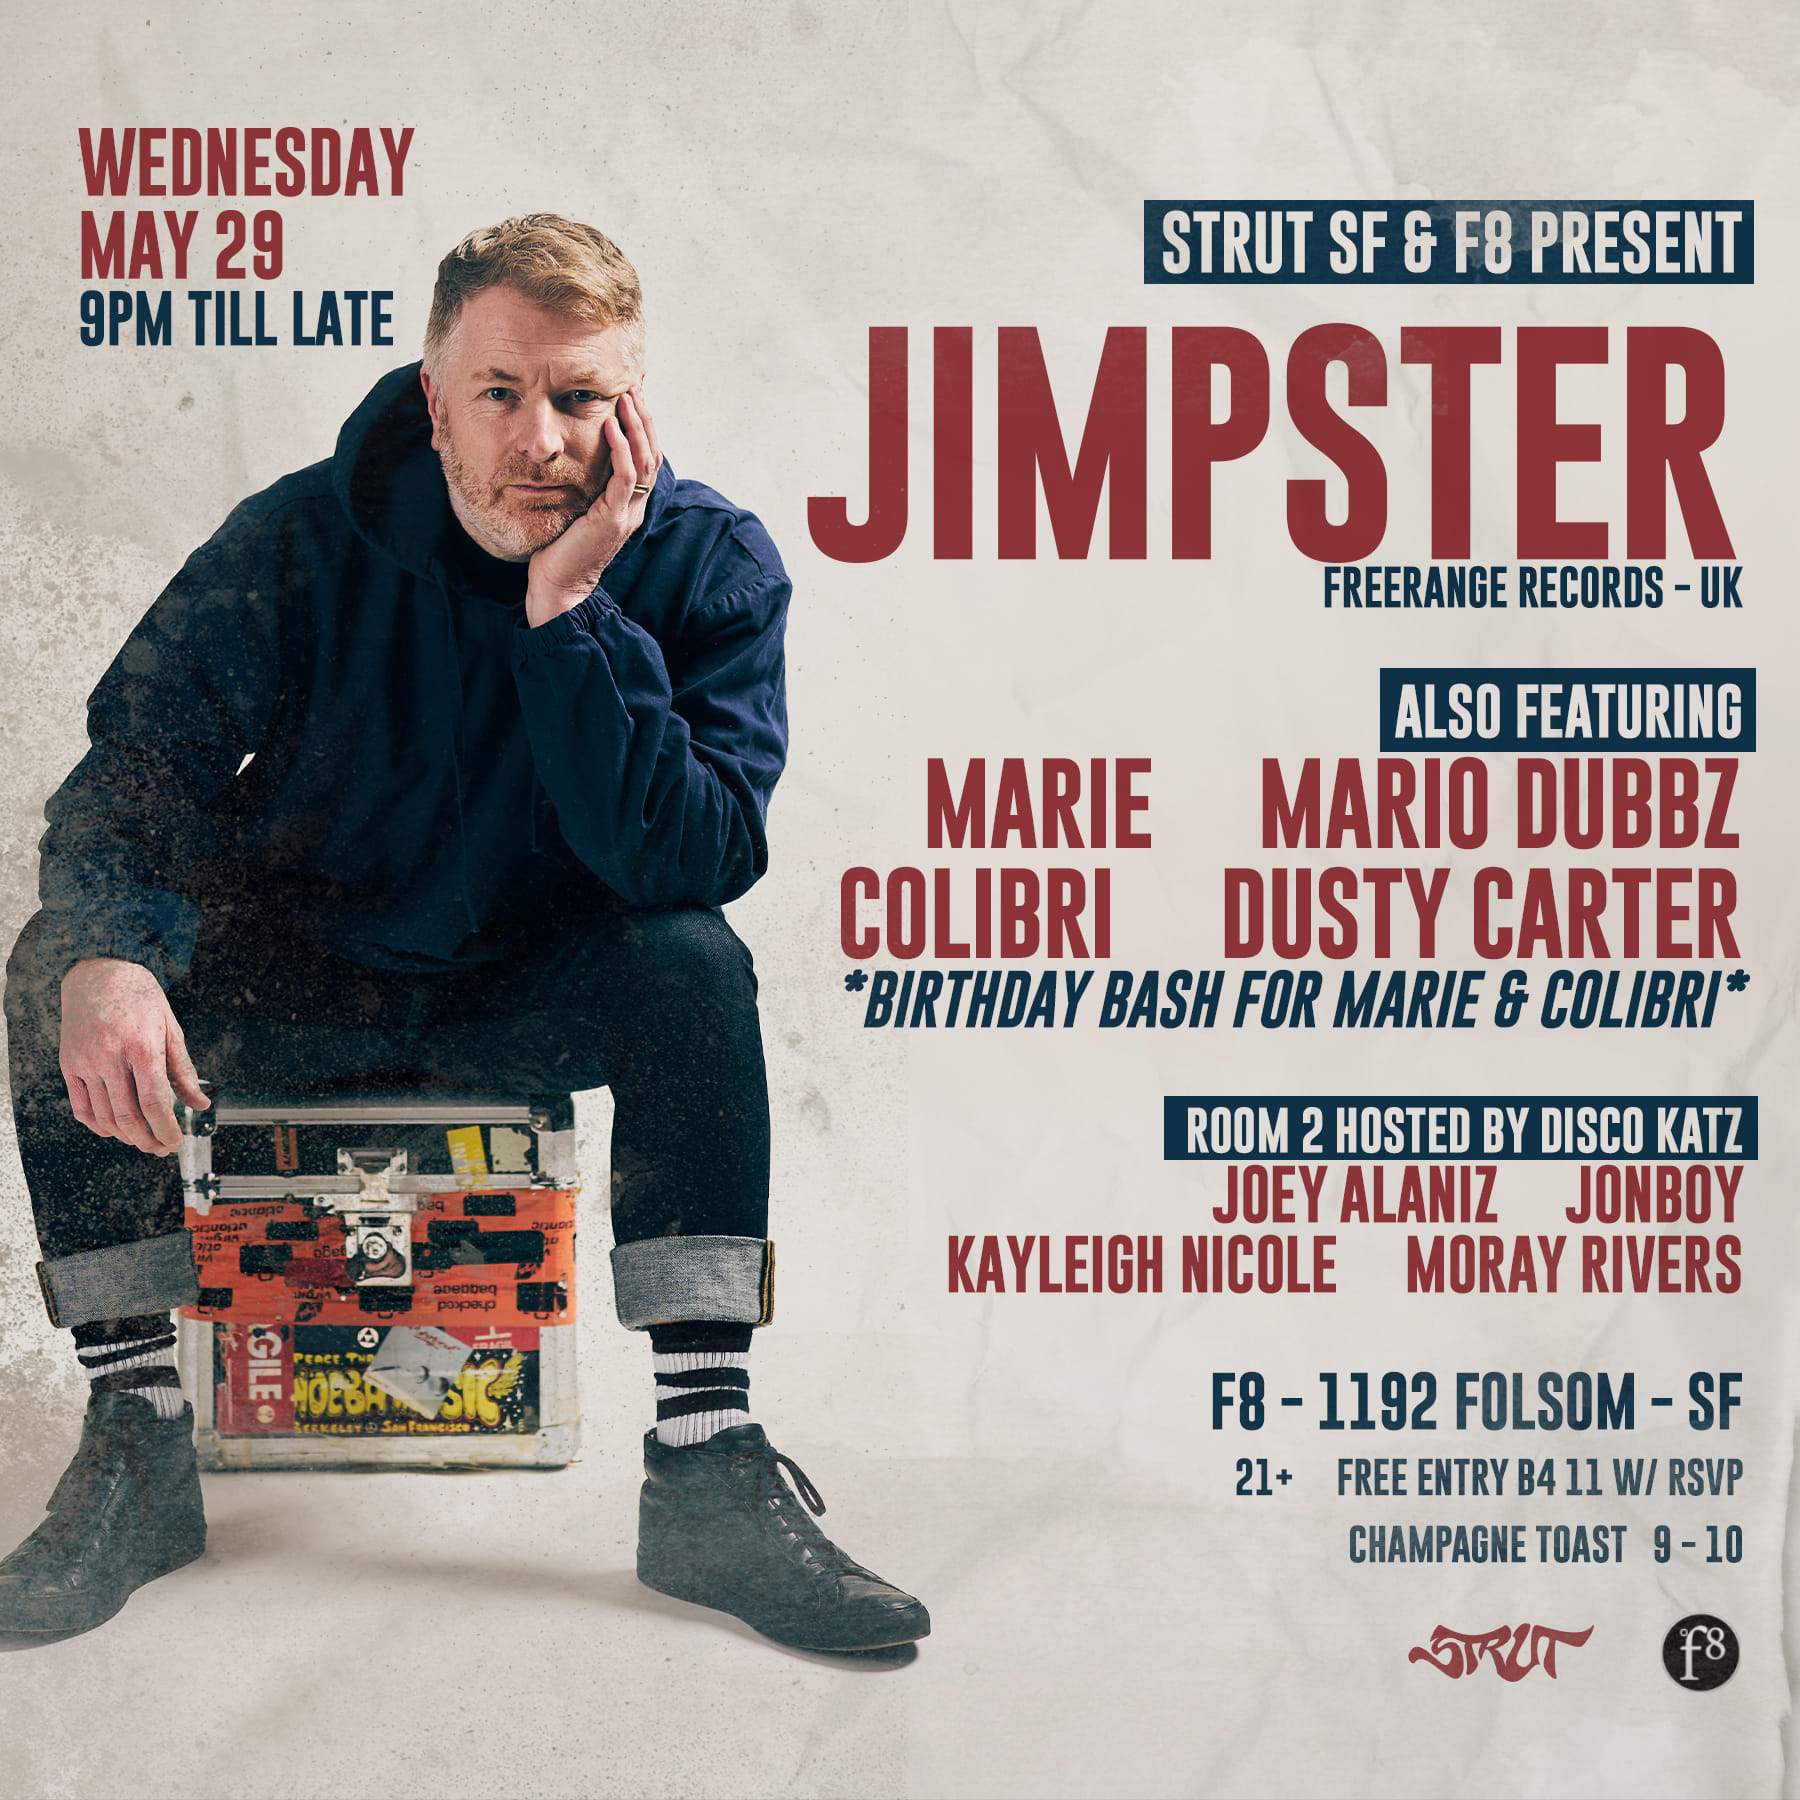 Strut SF and F8 Presents Jimpster - フライヤー表